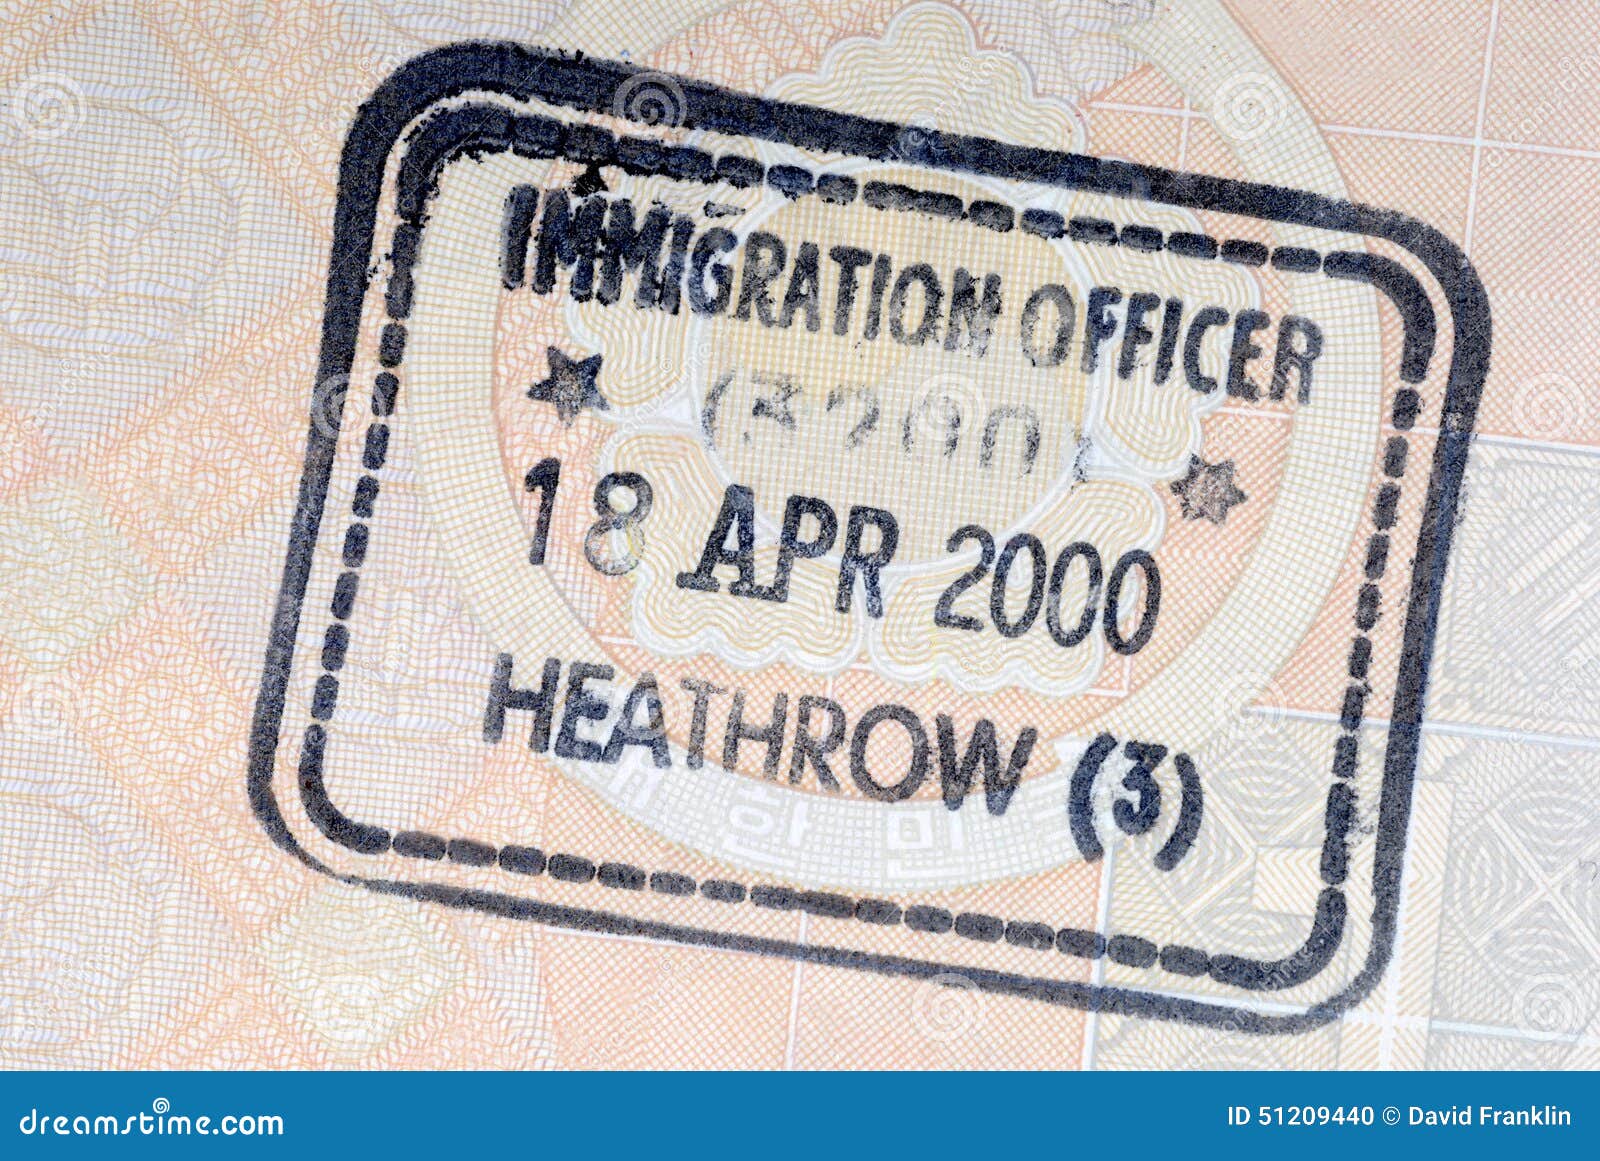 Uk Immigration Arrival Passport Stamp Stock Photo Image Of